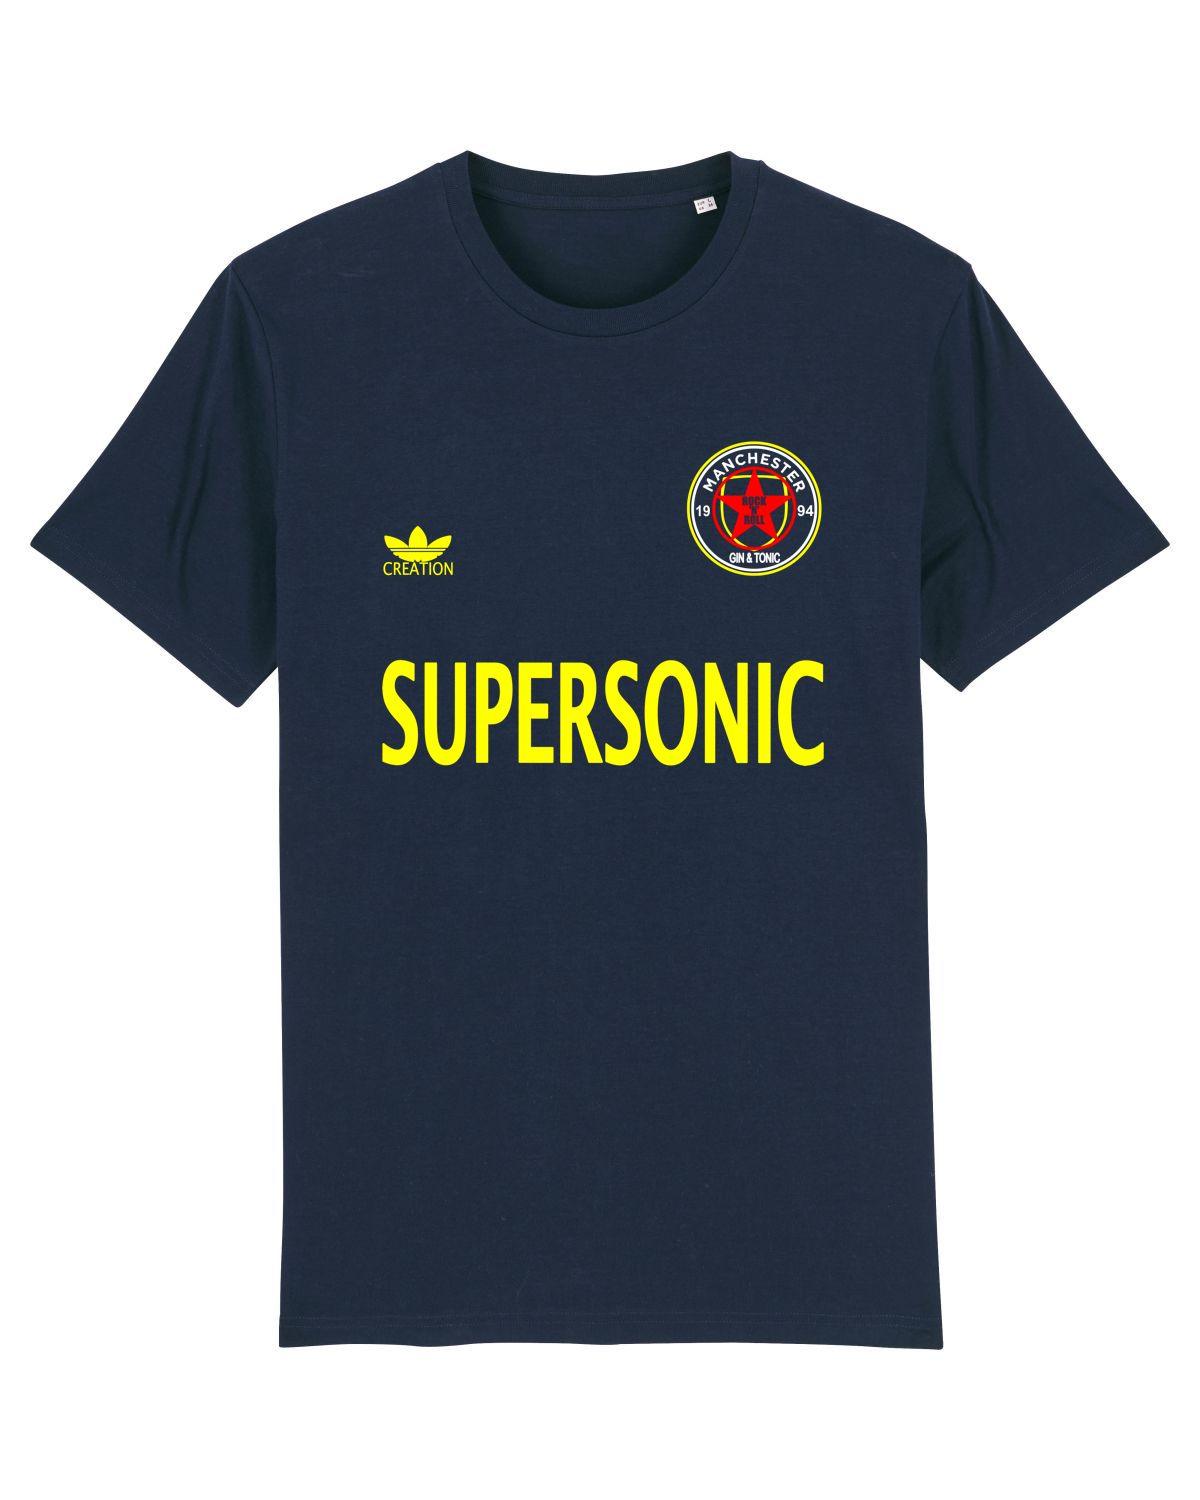 SUPERSONIC STAR: T-Shirt Inspired by Oasis & Football : Sound is Colour